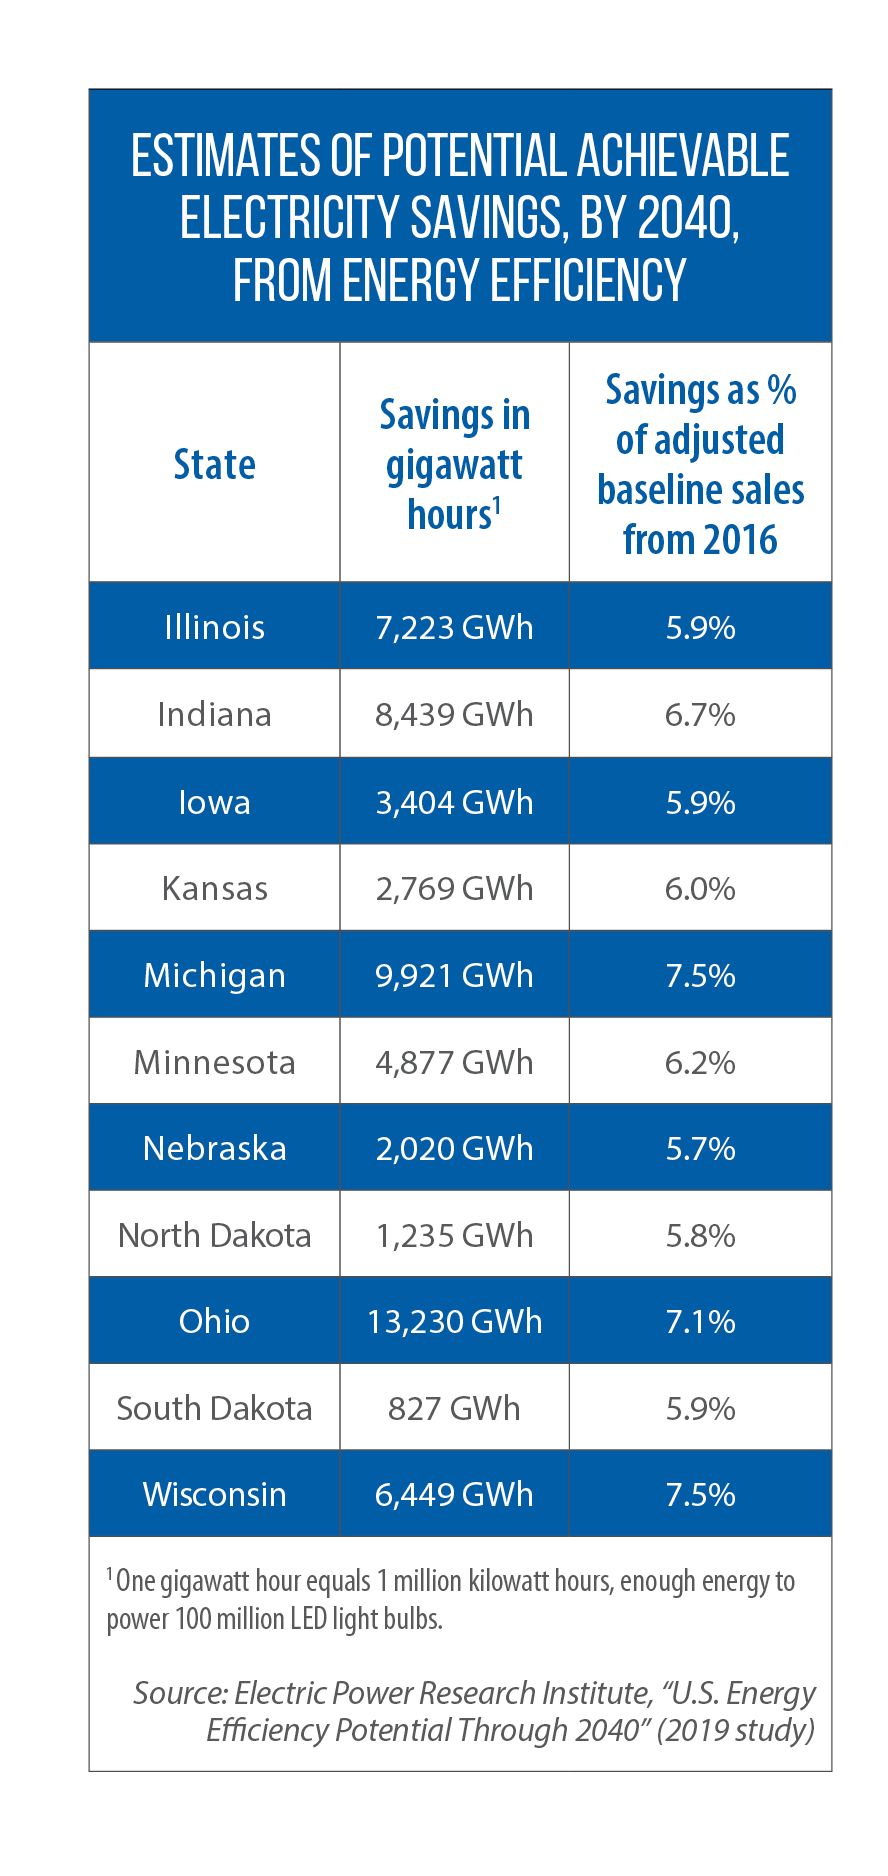 Table of estimated potential electricity savings by 2040 from energy efficiency in Midwestern states